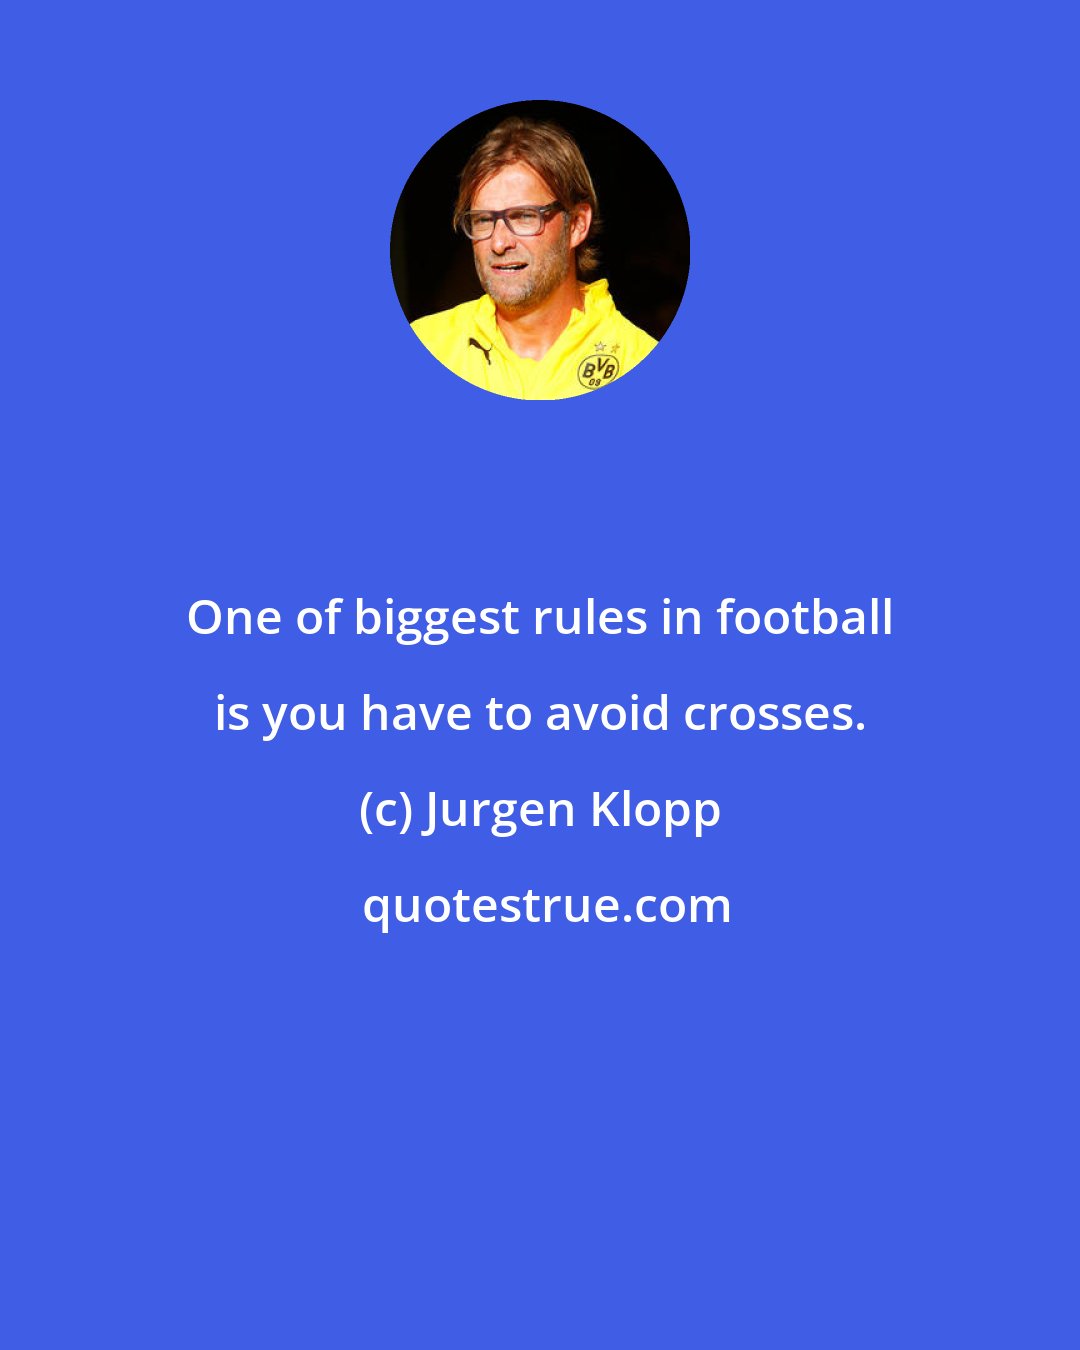 Jurgen Klopp: One of biggest rules in football is you have to avoid crosses.